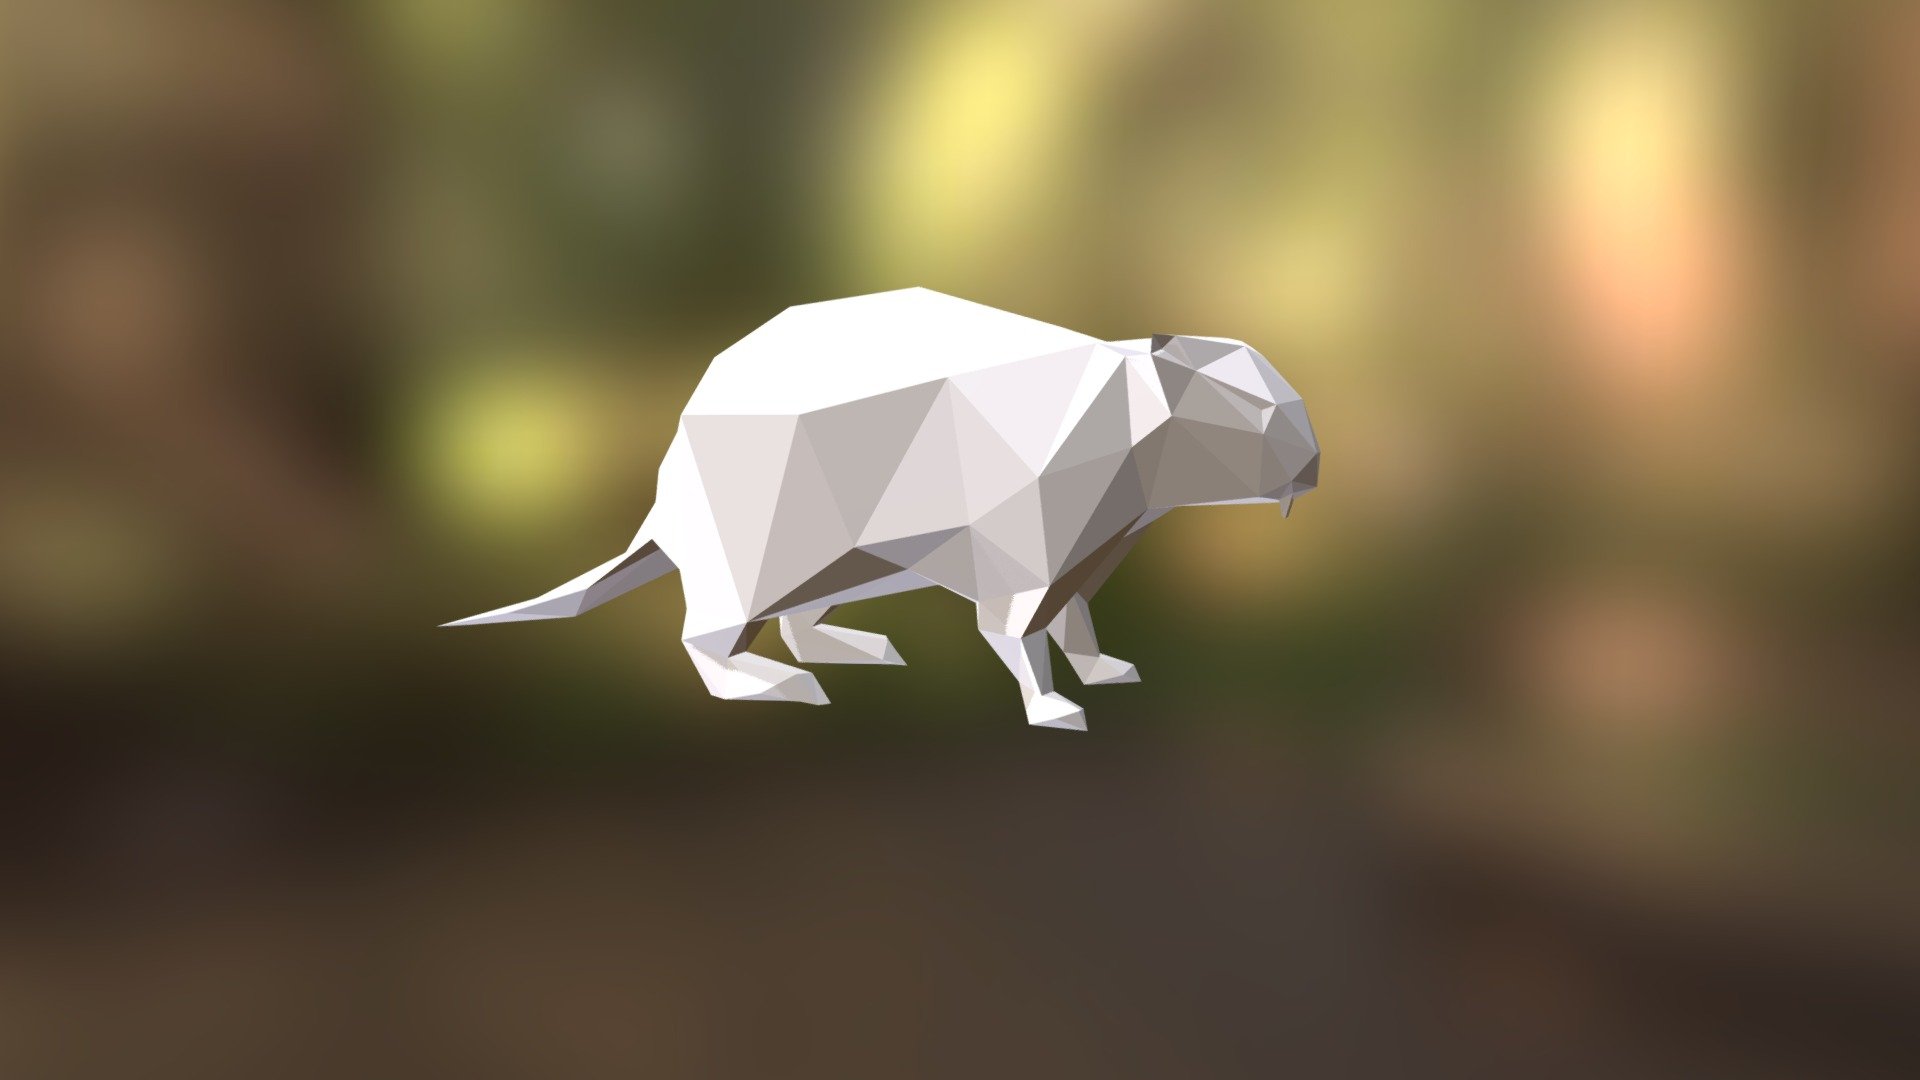 Beaver Low Poly Model For 3d Printing 3d Model By Peolla3d 0b99743 Sketchfab